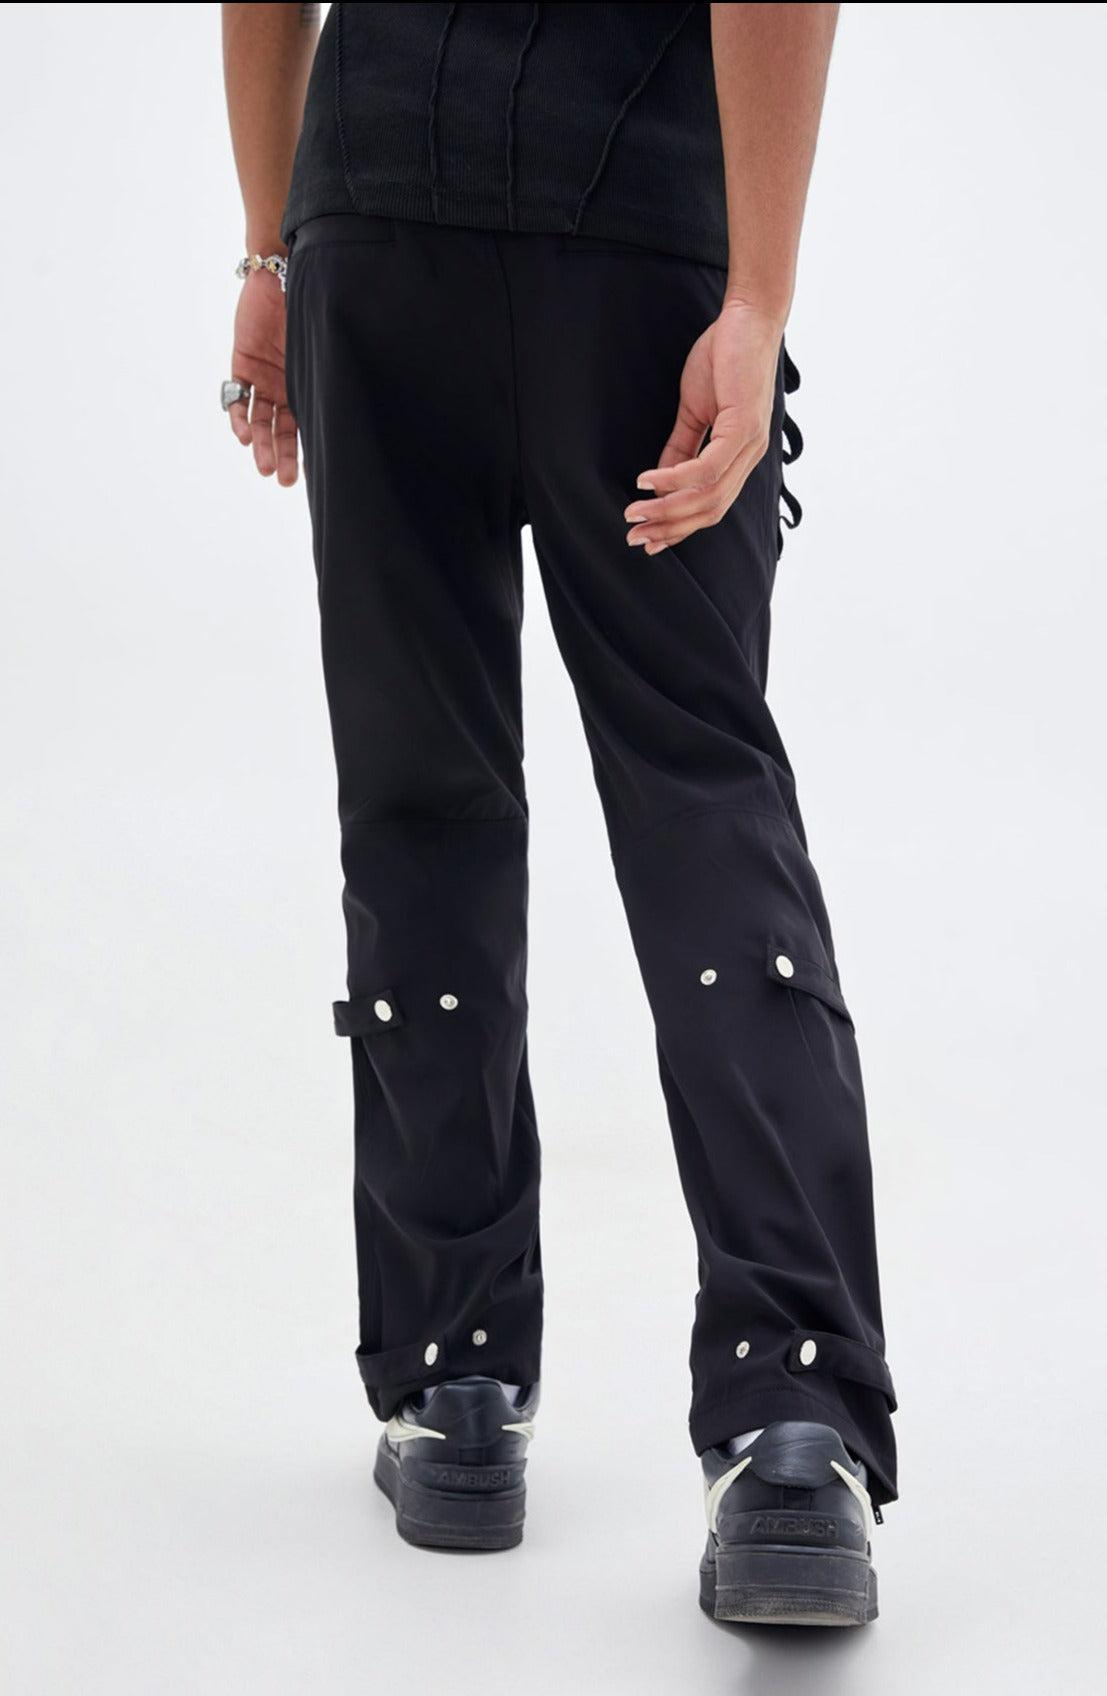 Made Extreme Diagonal Zipper Straight Leg Pants Korean Street Fashion Pants By Made Extreme Shop Online at OH Vault